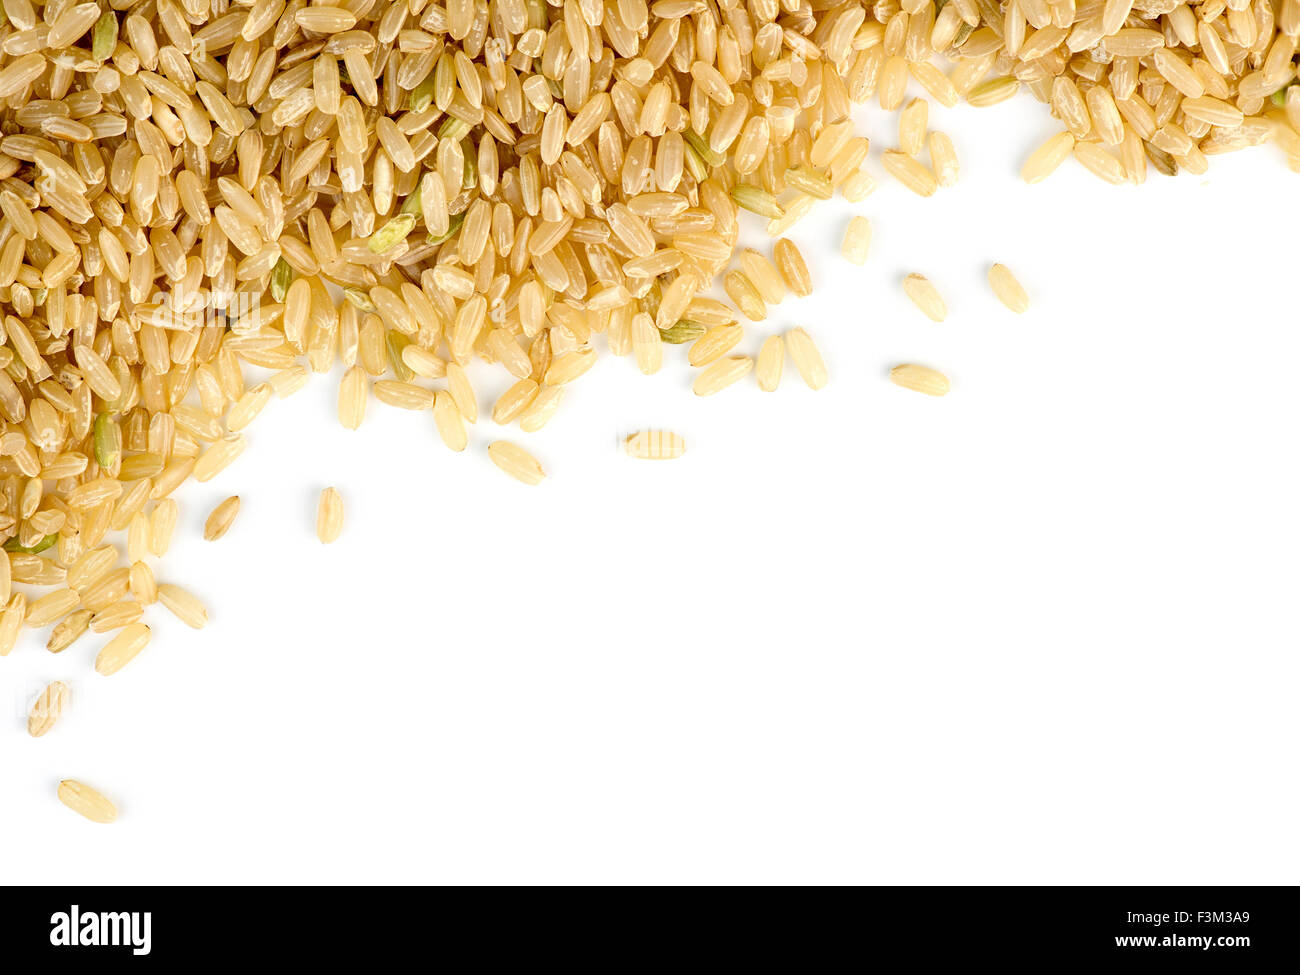 Brown rice scattered against white with copyspace Stock Photo